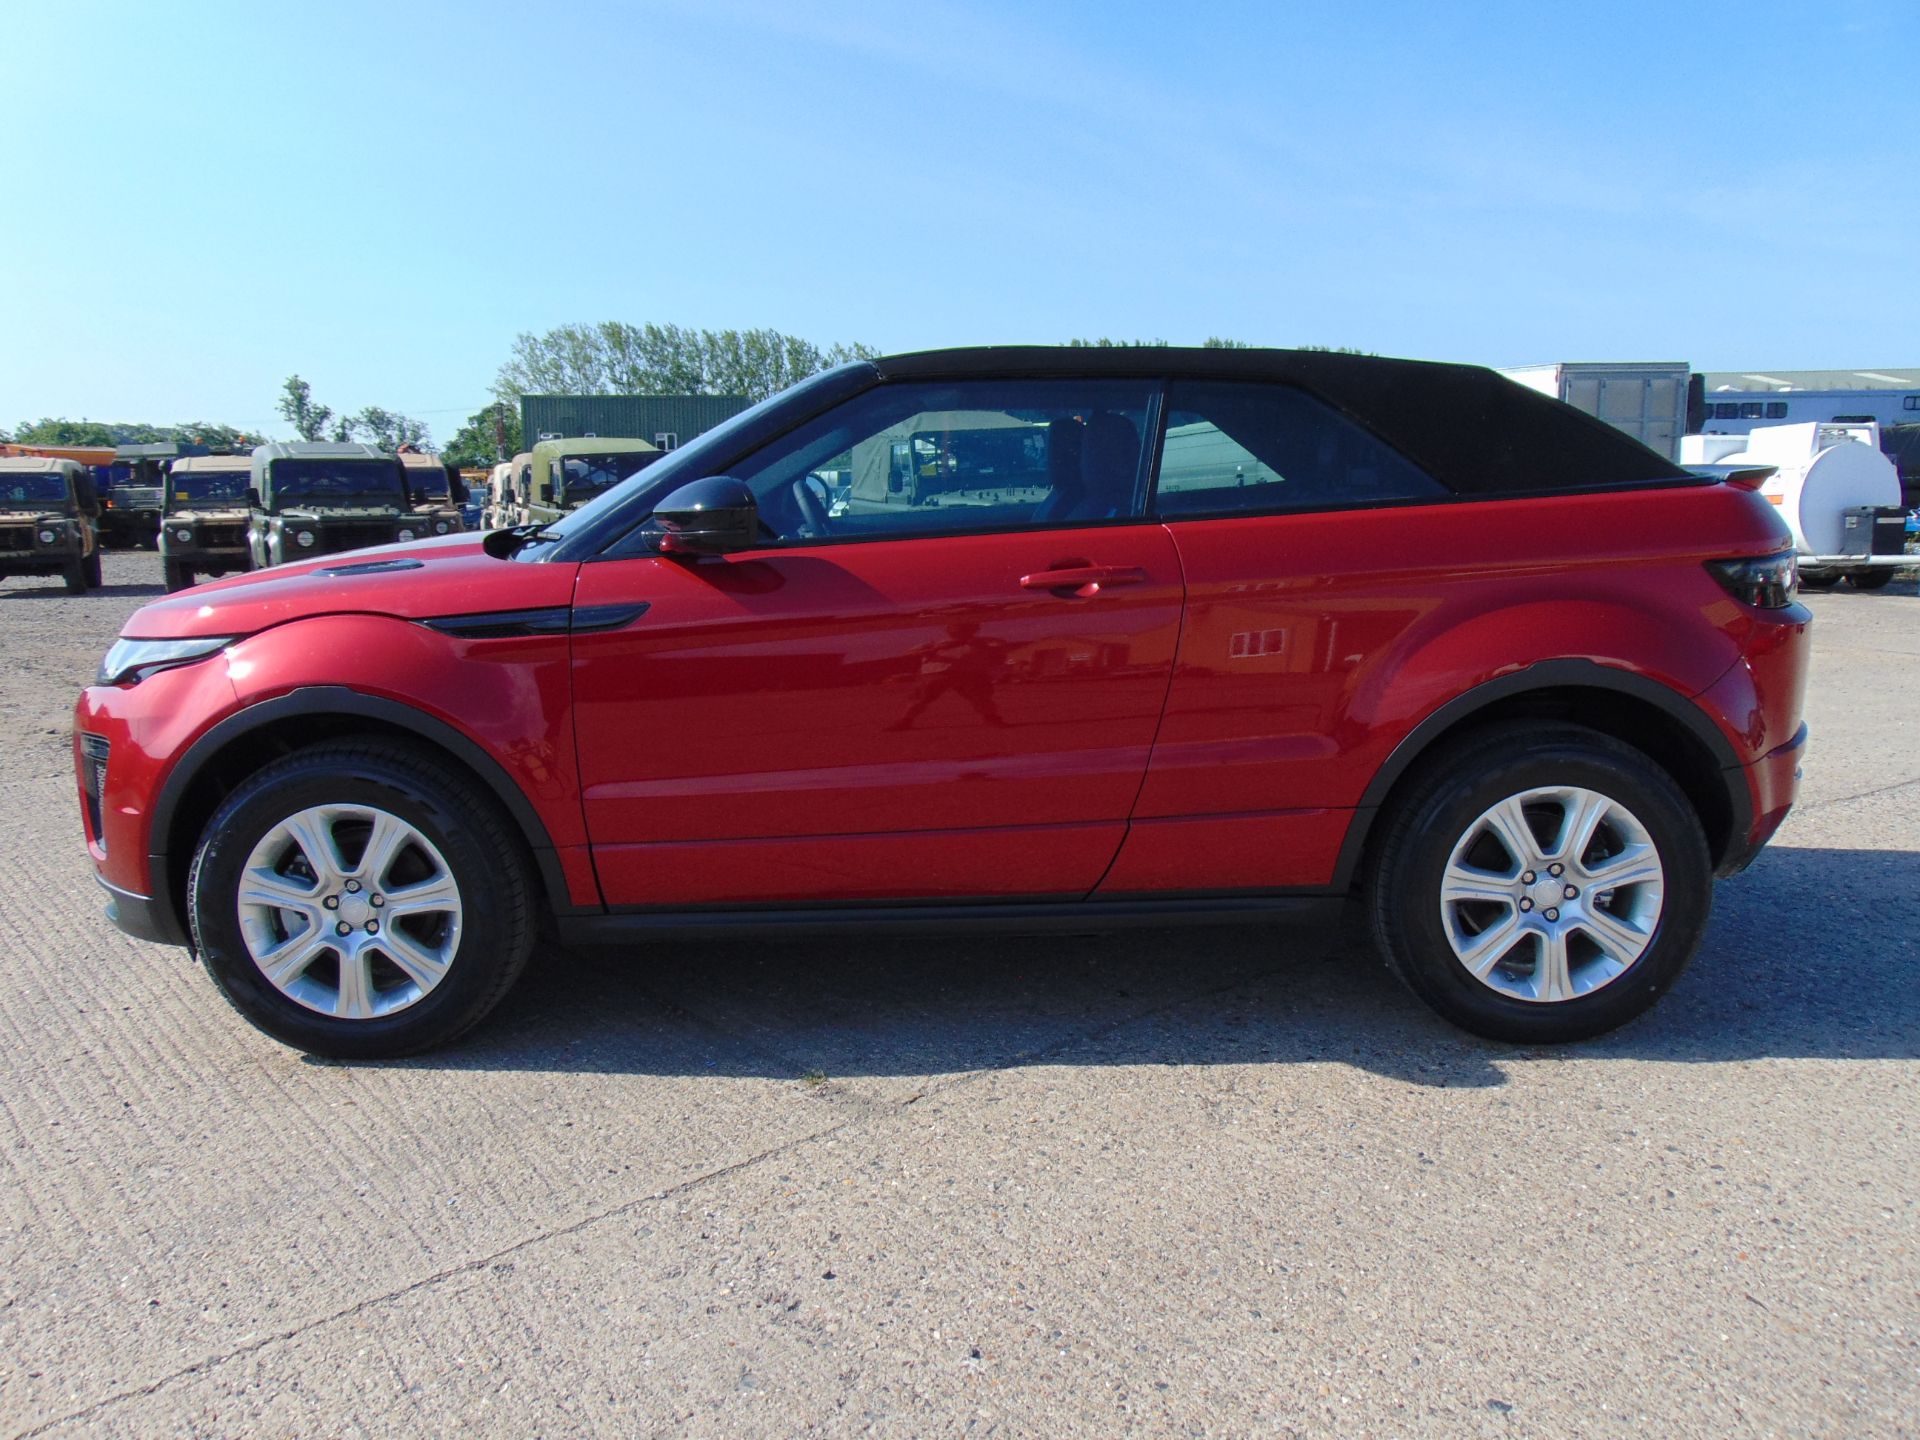 NEW UNUSED Range Rover Evoque 2.0 i4 HSE Dynamic Convertible - Image 11 of 39